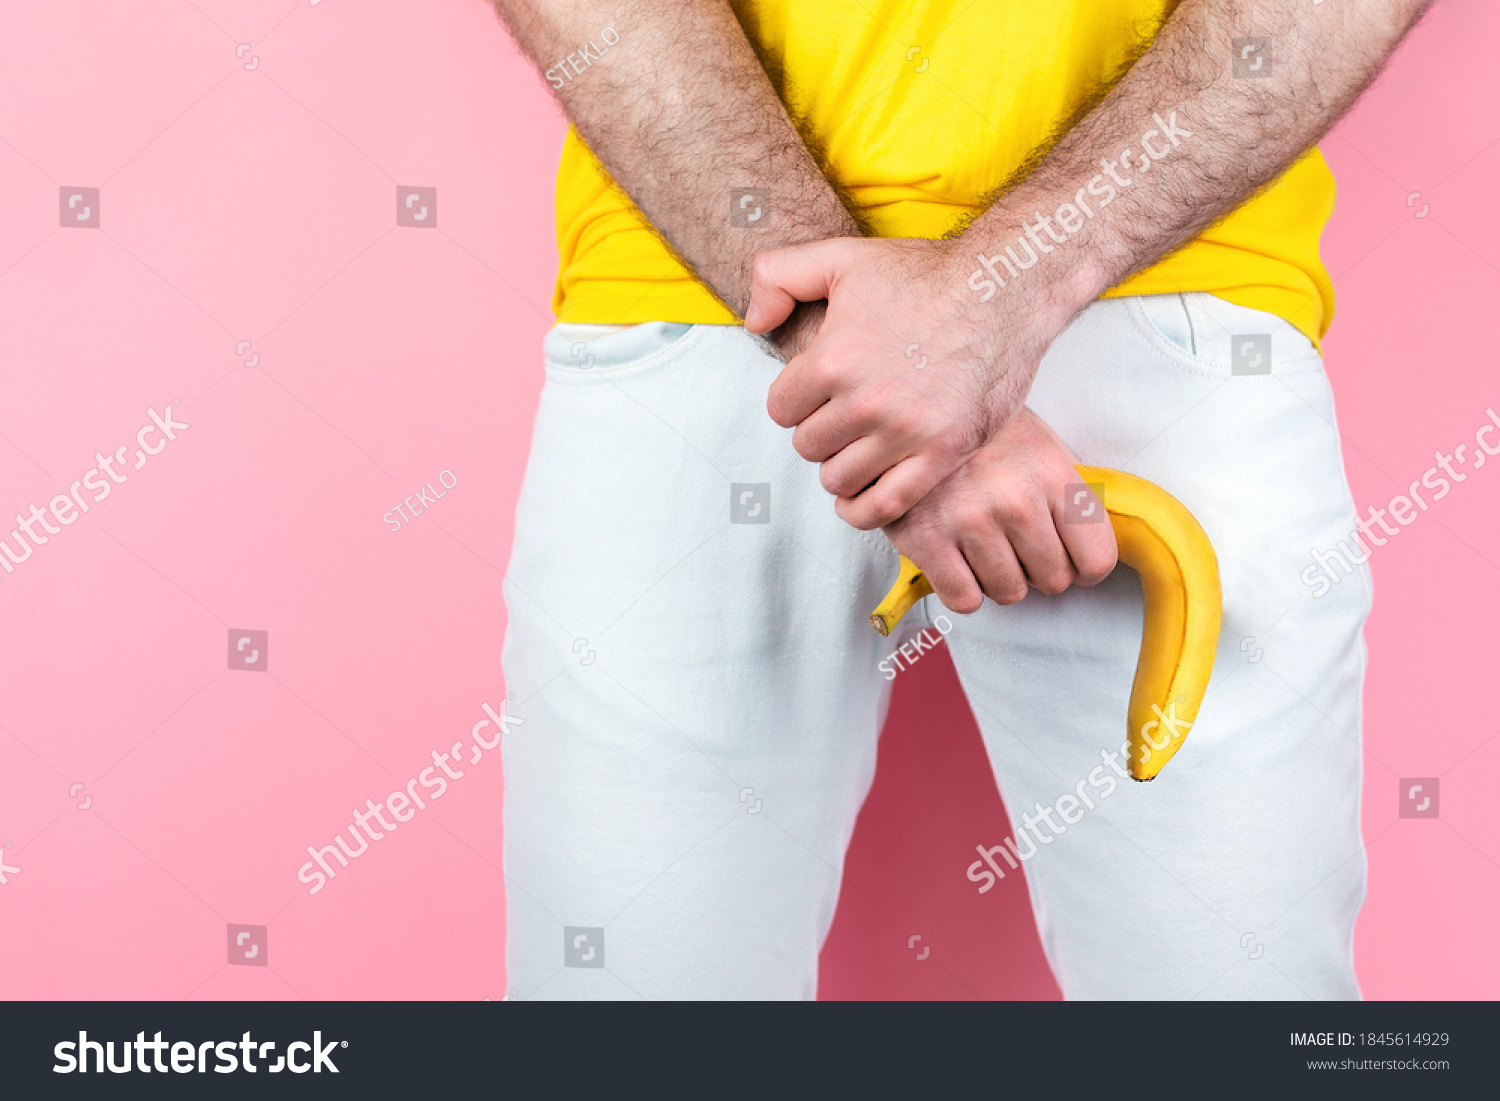 stock-photo-impotence-and-men-s-health-a-man-in-white-jeans-legs-apart-holds-a-limp-banana-near-the-genitals-1845614929.jpg